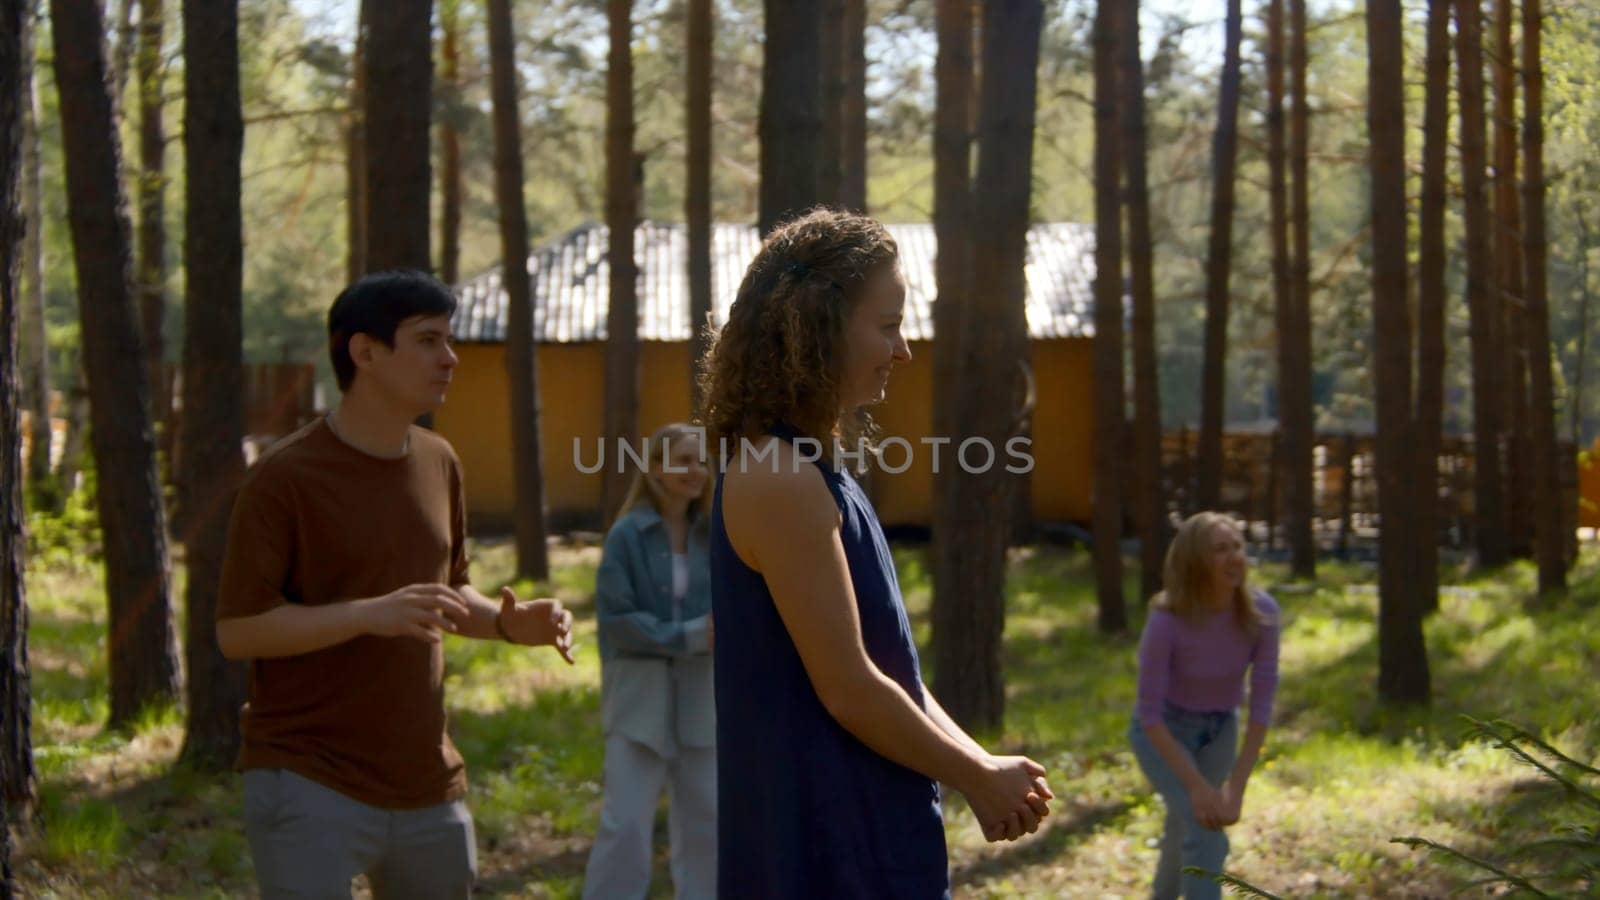 People have fun playing volleyball in park. Stock footage. Friends are actively playing volleyball in forest clearing. Fun ball games for group of friends in forest.